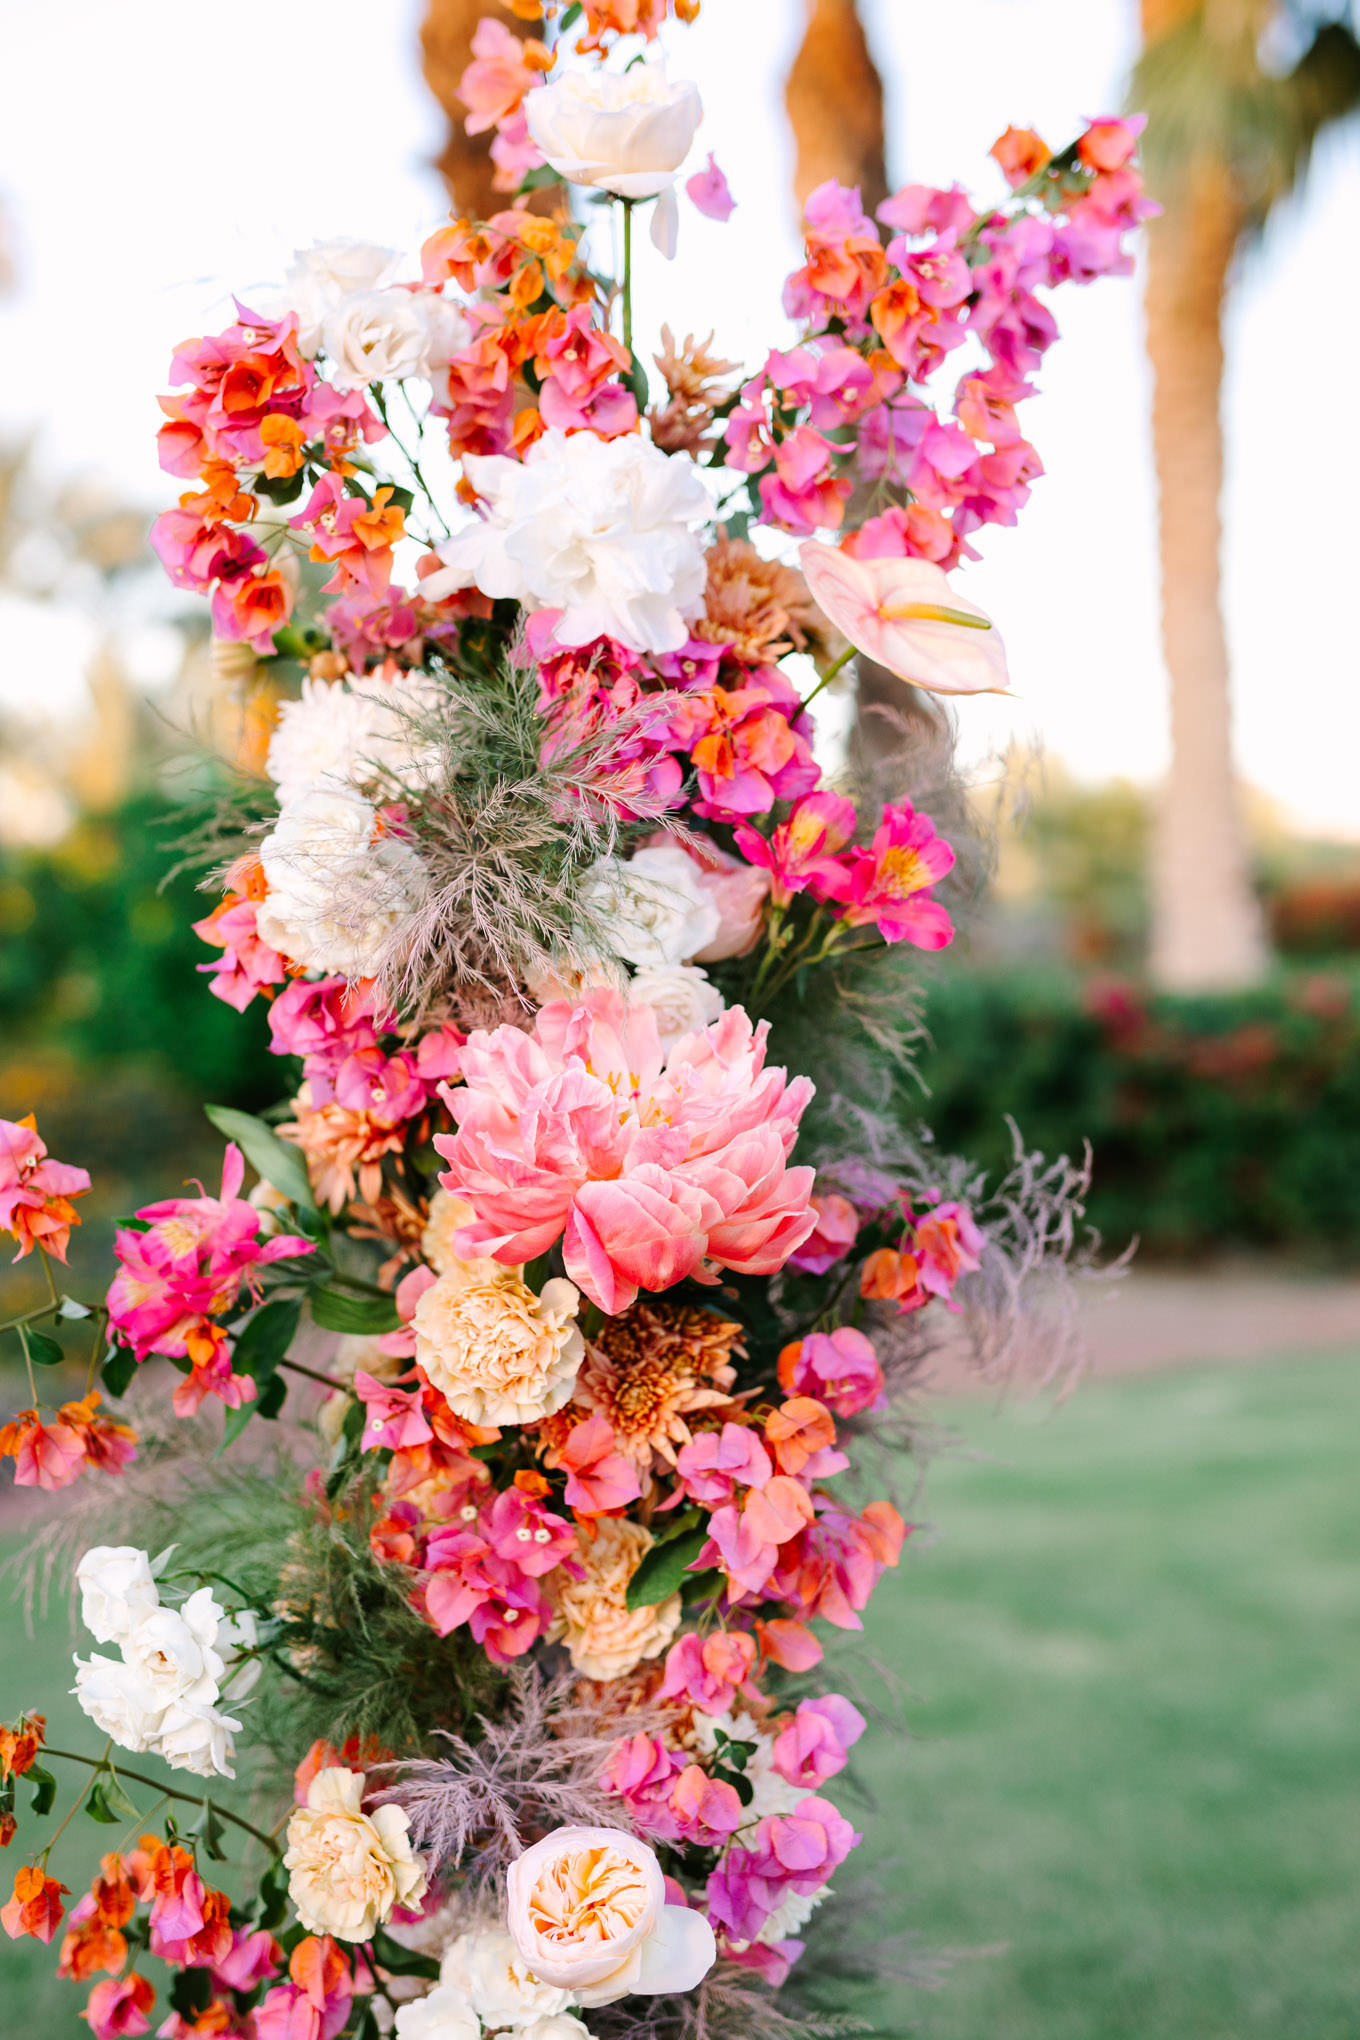 Wedding flowers | Pink Bougainvillea Estate wedding | Colorful LA wedding photography | #bougainvilleaestate #palmspringswedding #palmspringsweddingvenue #palmspringsphotographer Source: Mary Costa Photography | Los Angeles